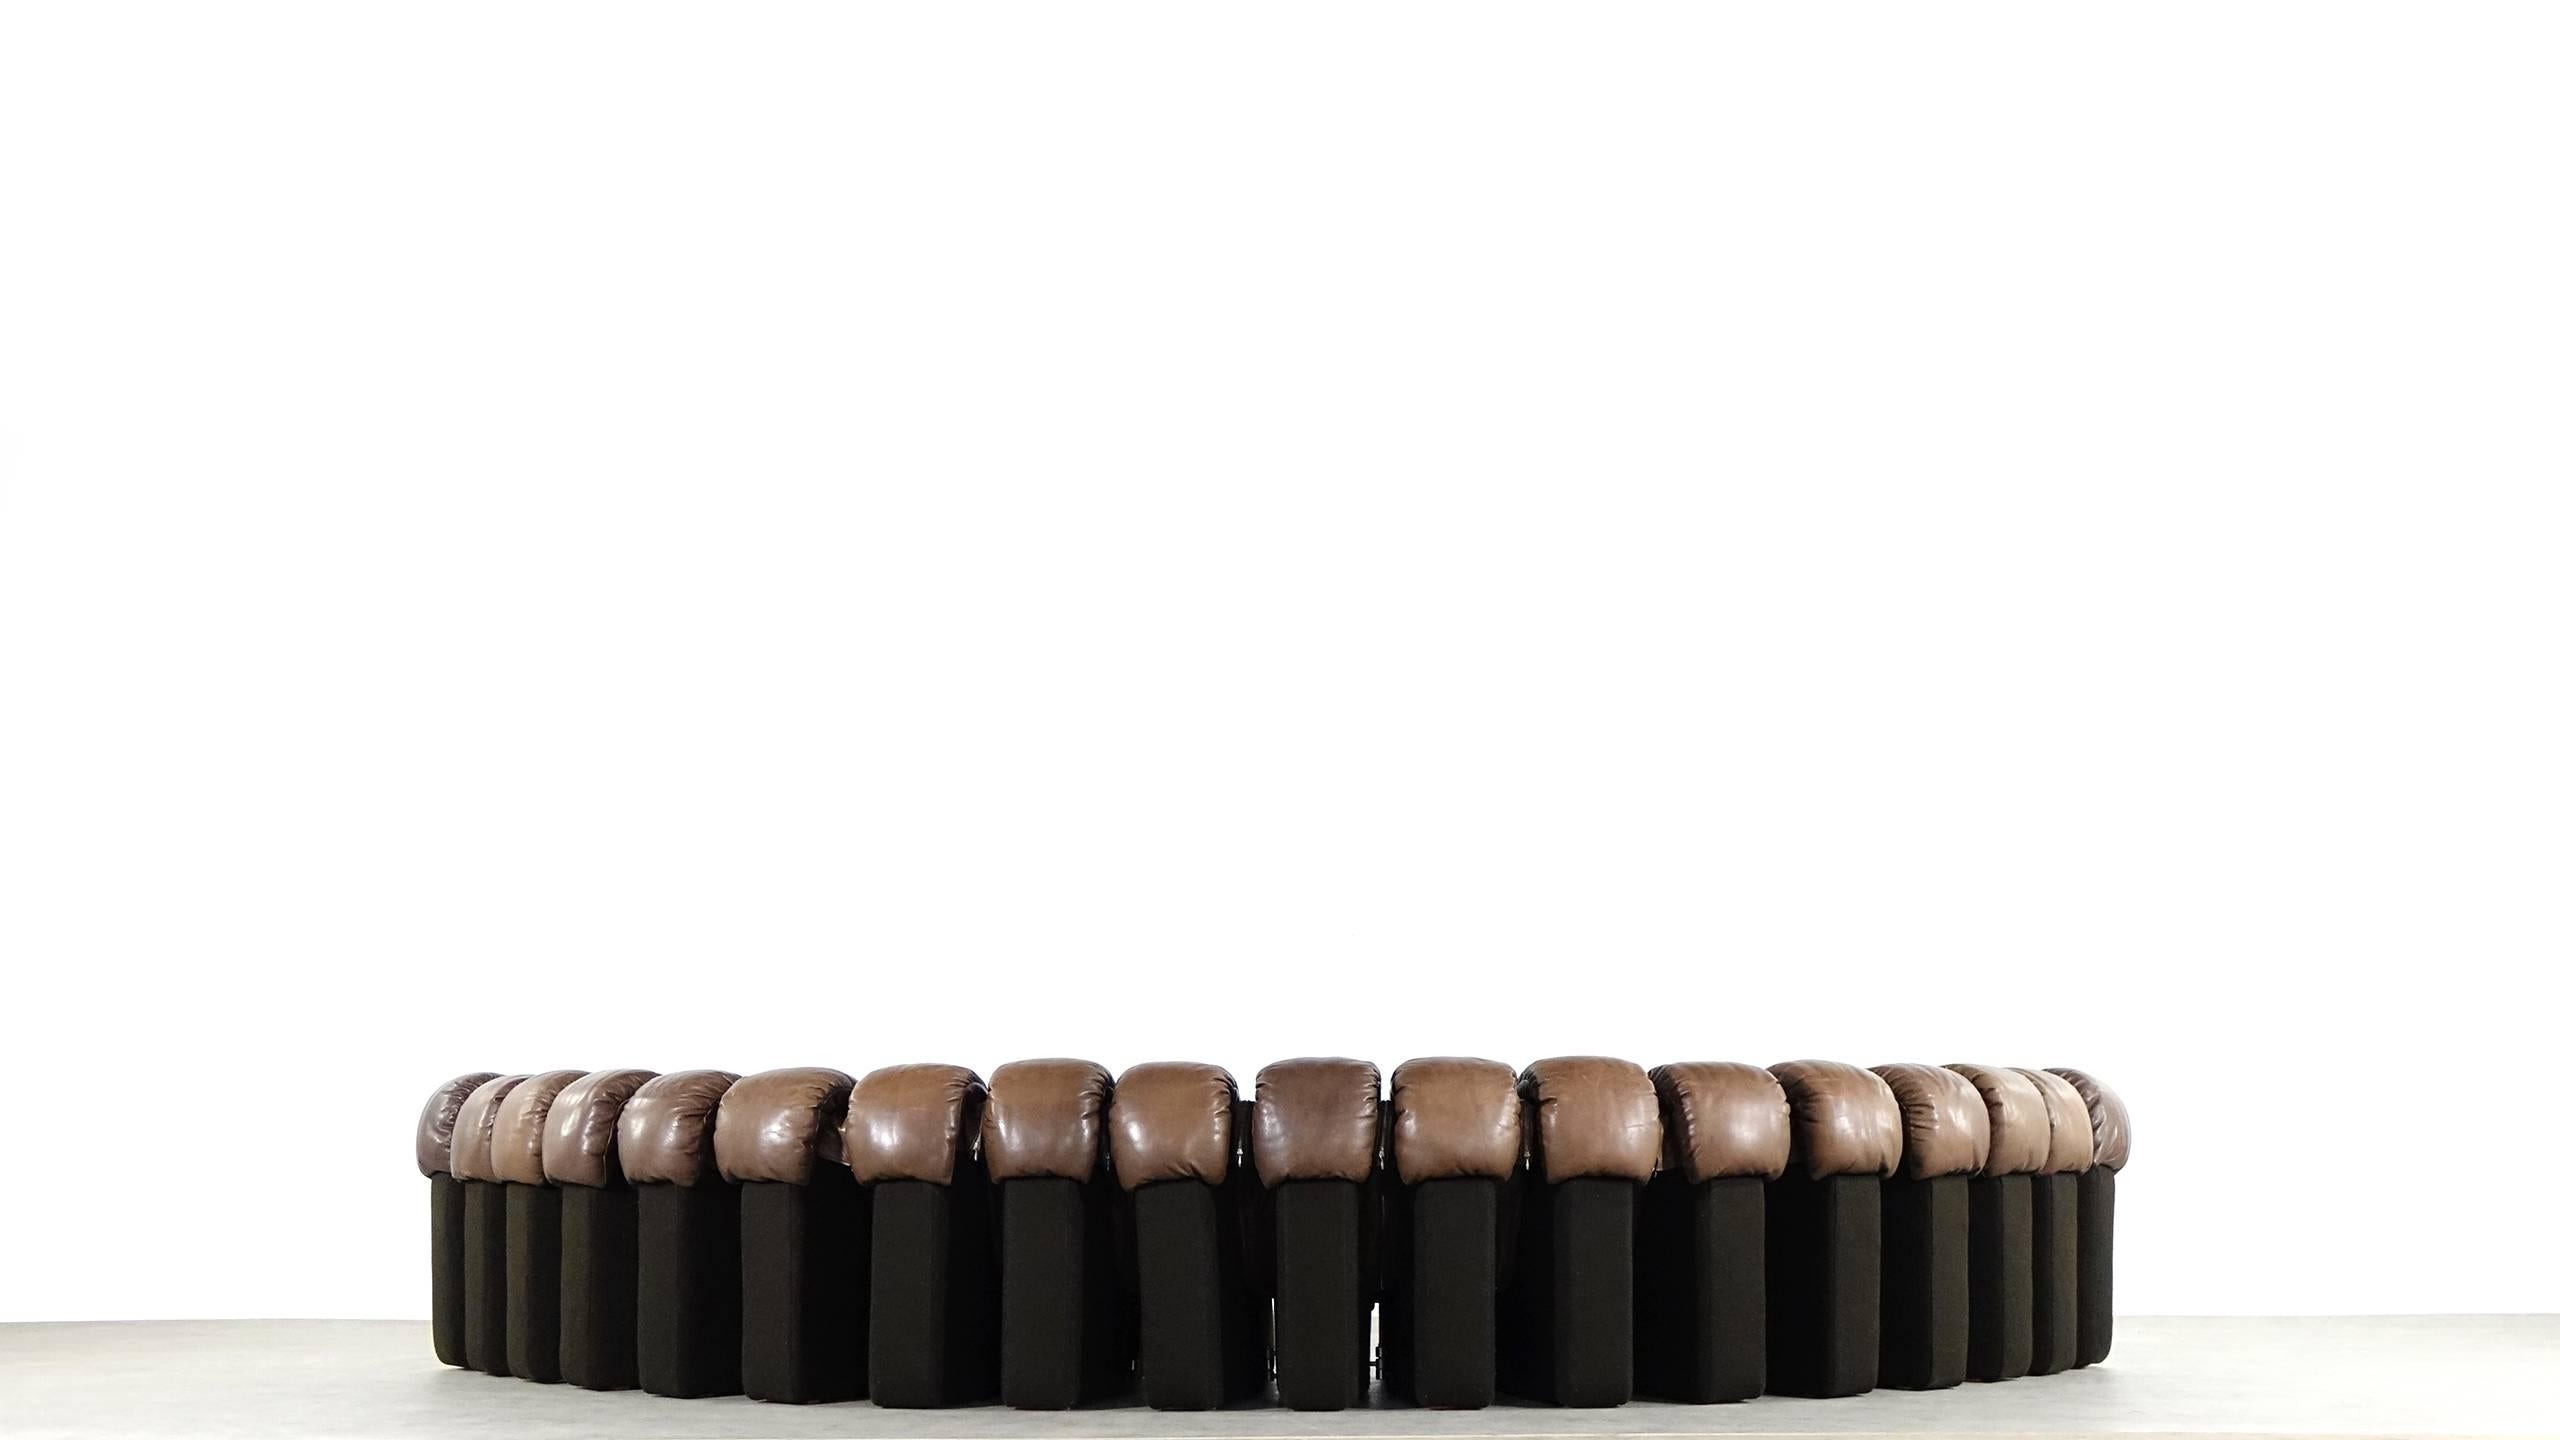 Mid-Century Modern De Sede Ds 600 Sofa by Ueli Berger and Riva 1972, Chocolate Leather 18 Elements